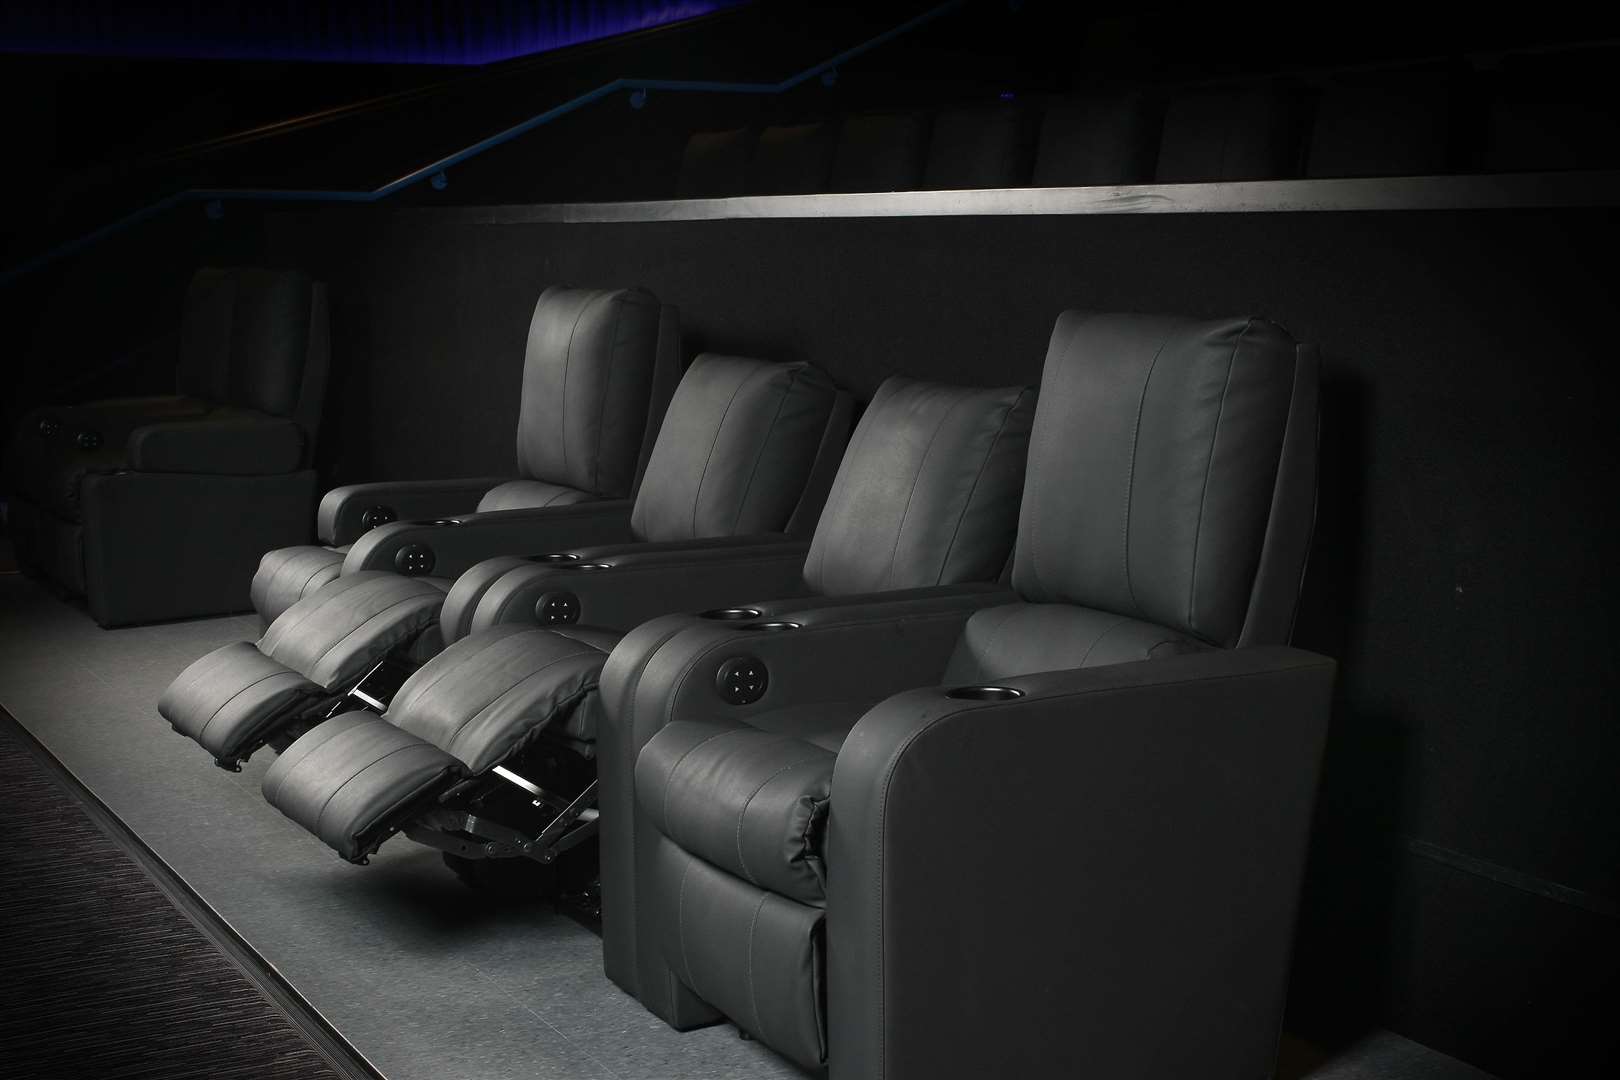 Showcase Cinema de Lux Bluewater will unveil four new screens in late 2017 with recliner seating